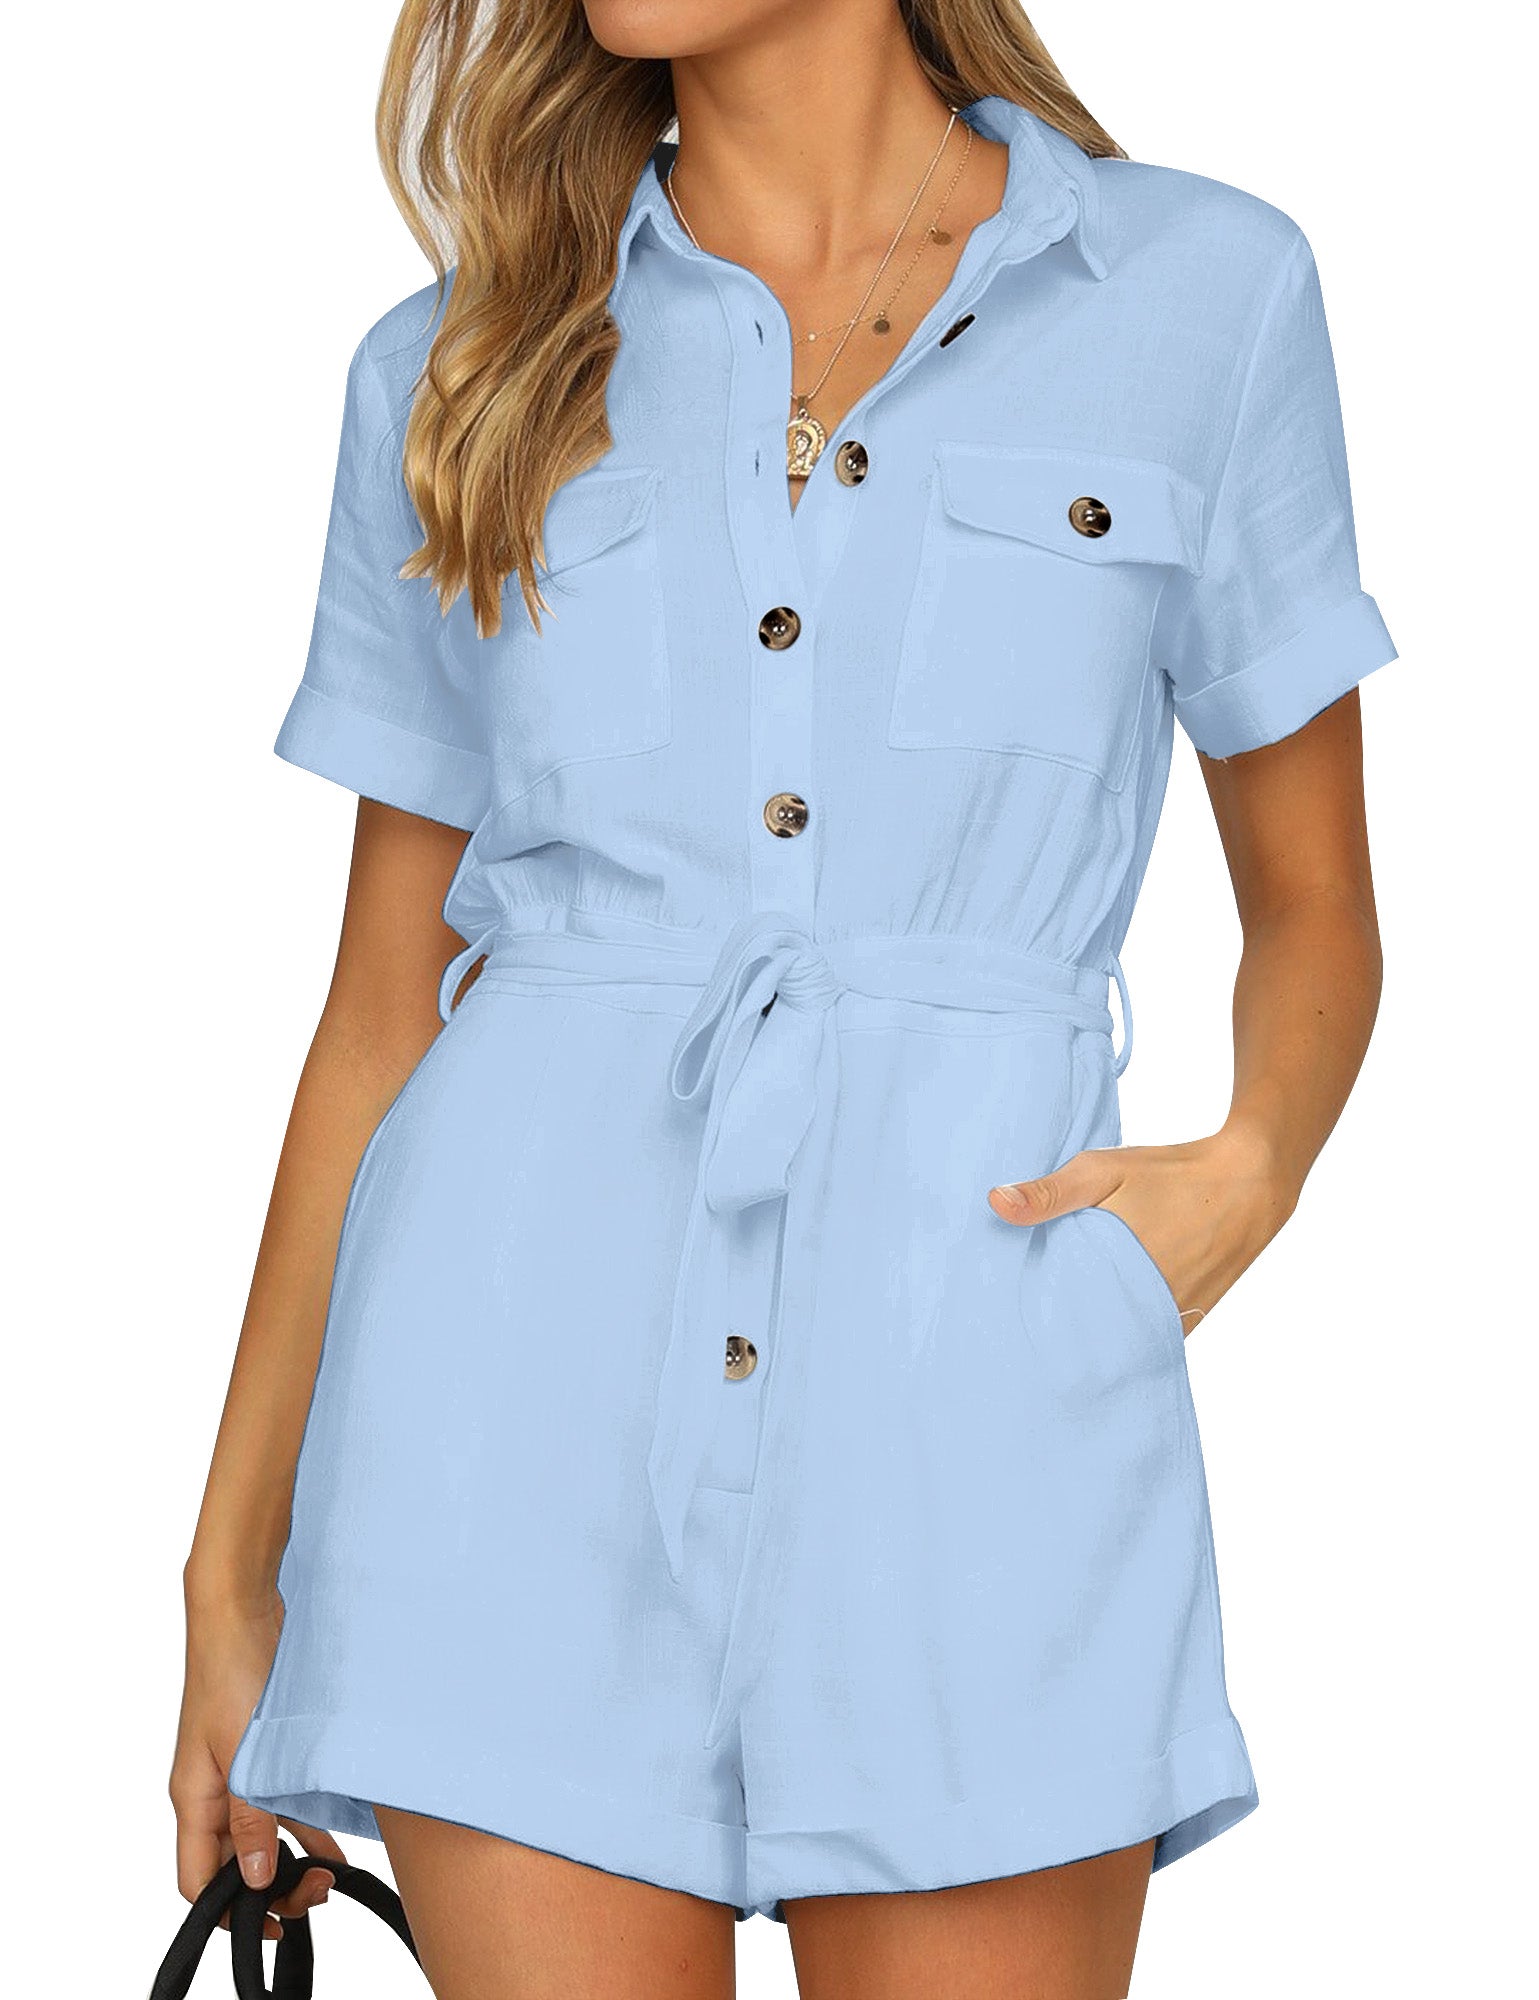 Women's Short Sleeve Jumpsuits & Rompers